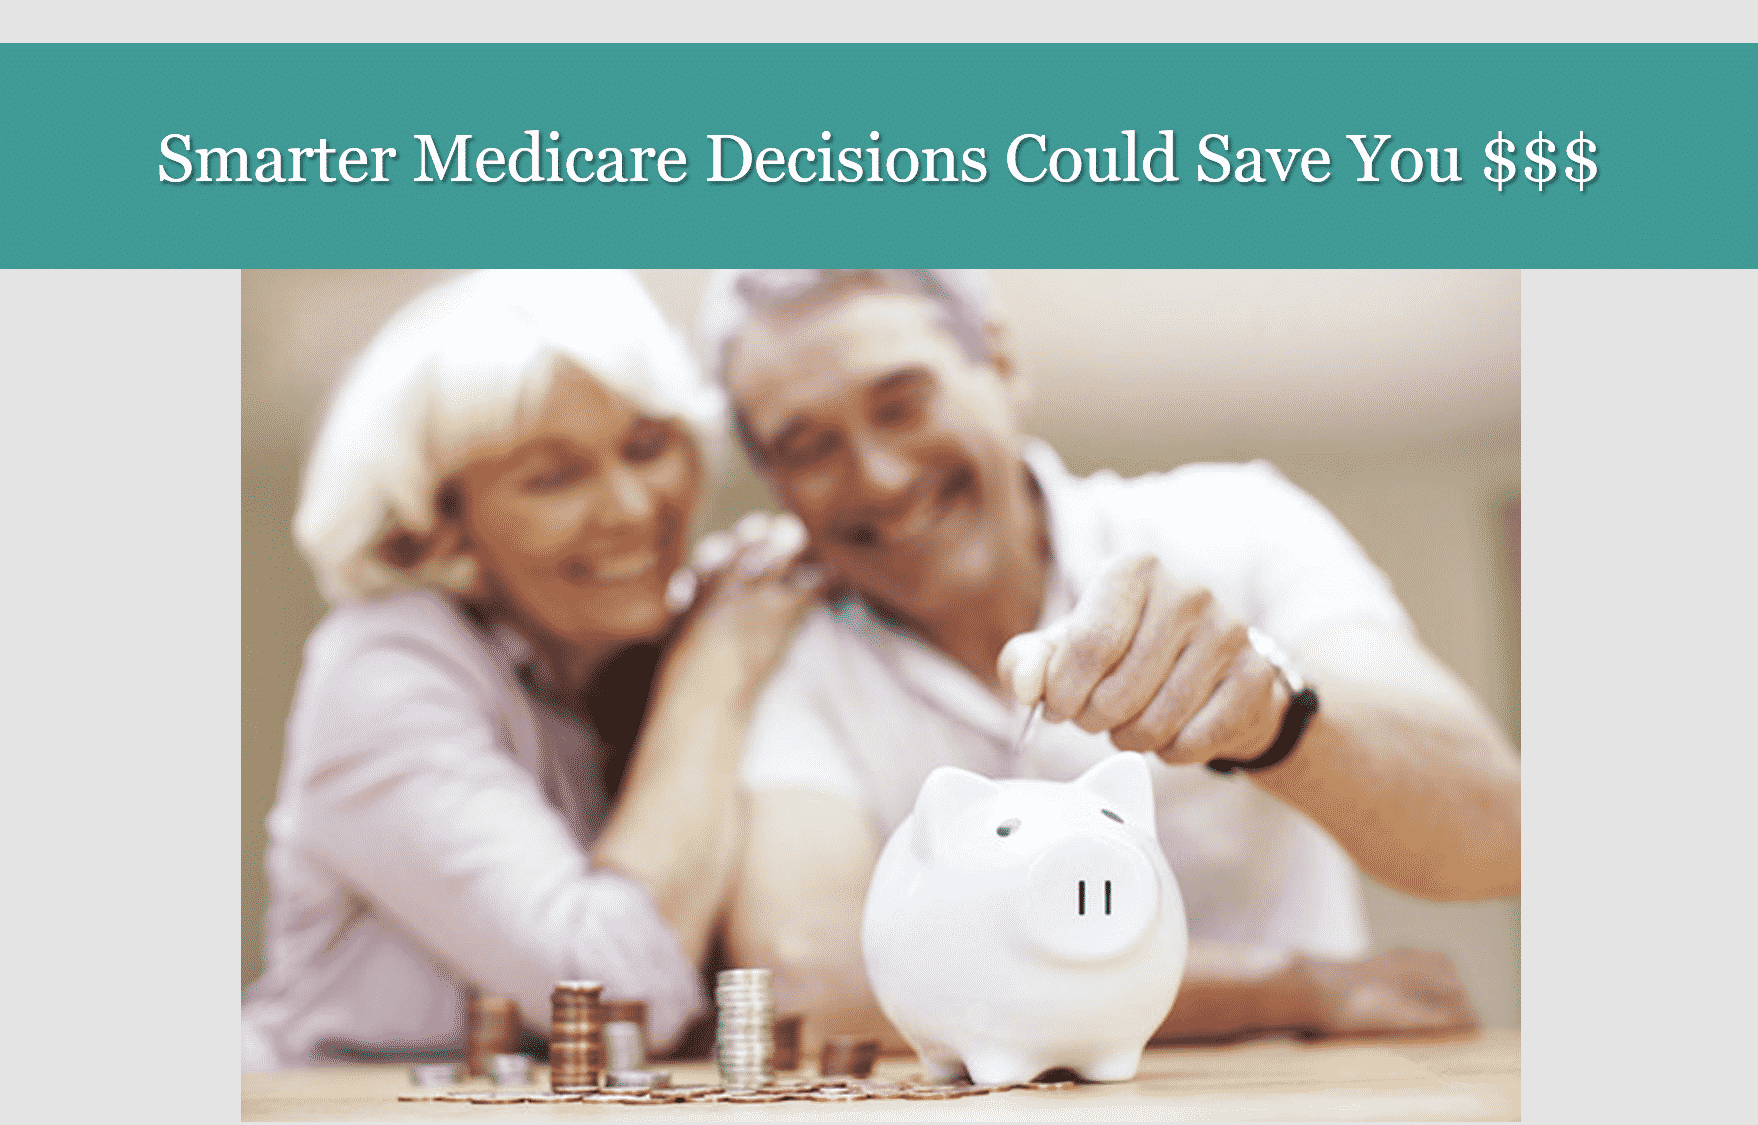 Smarter Medicare Decisions Could Save You $$$